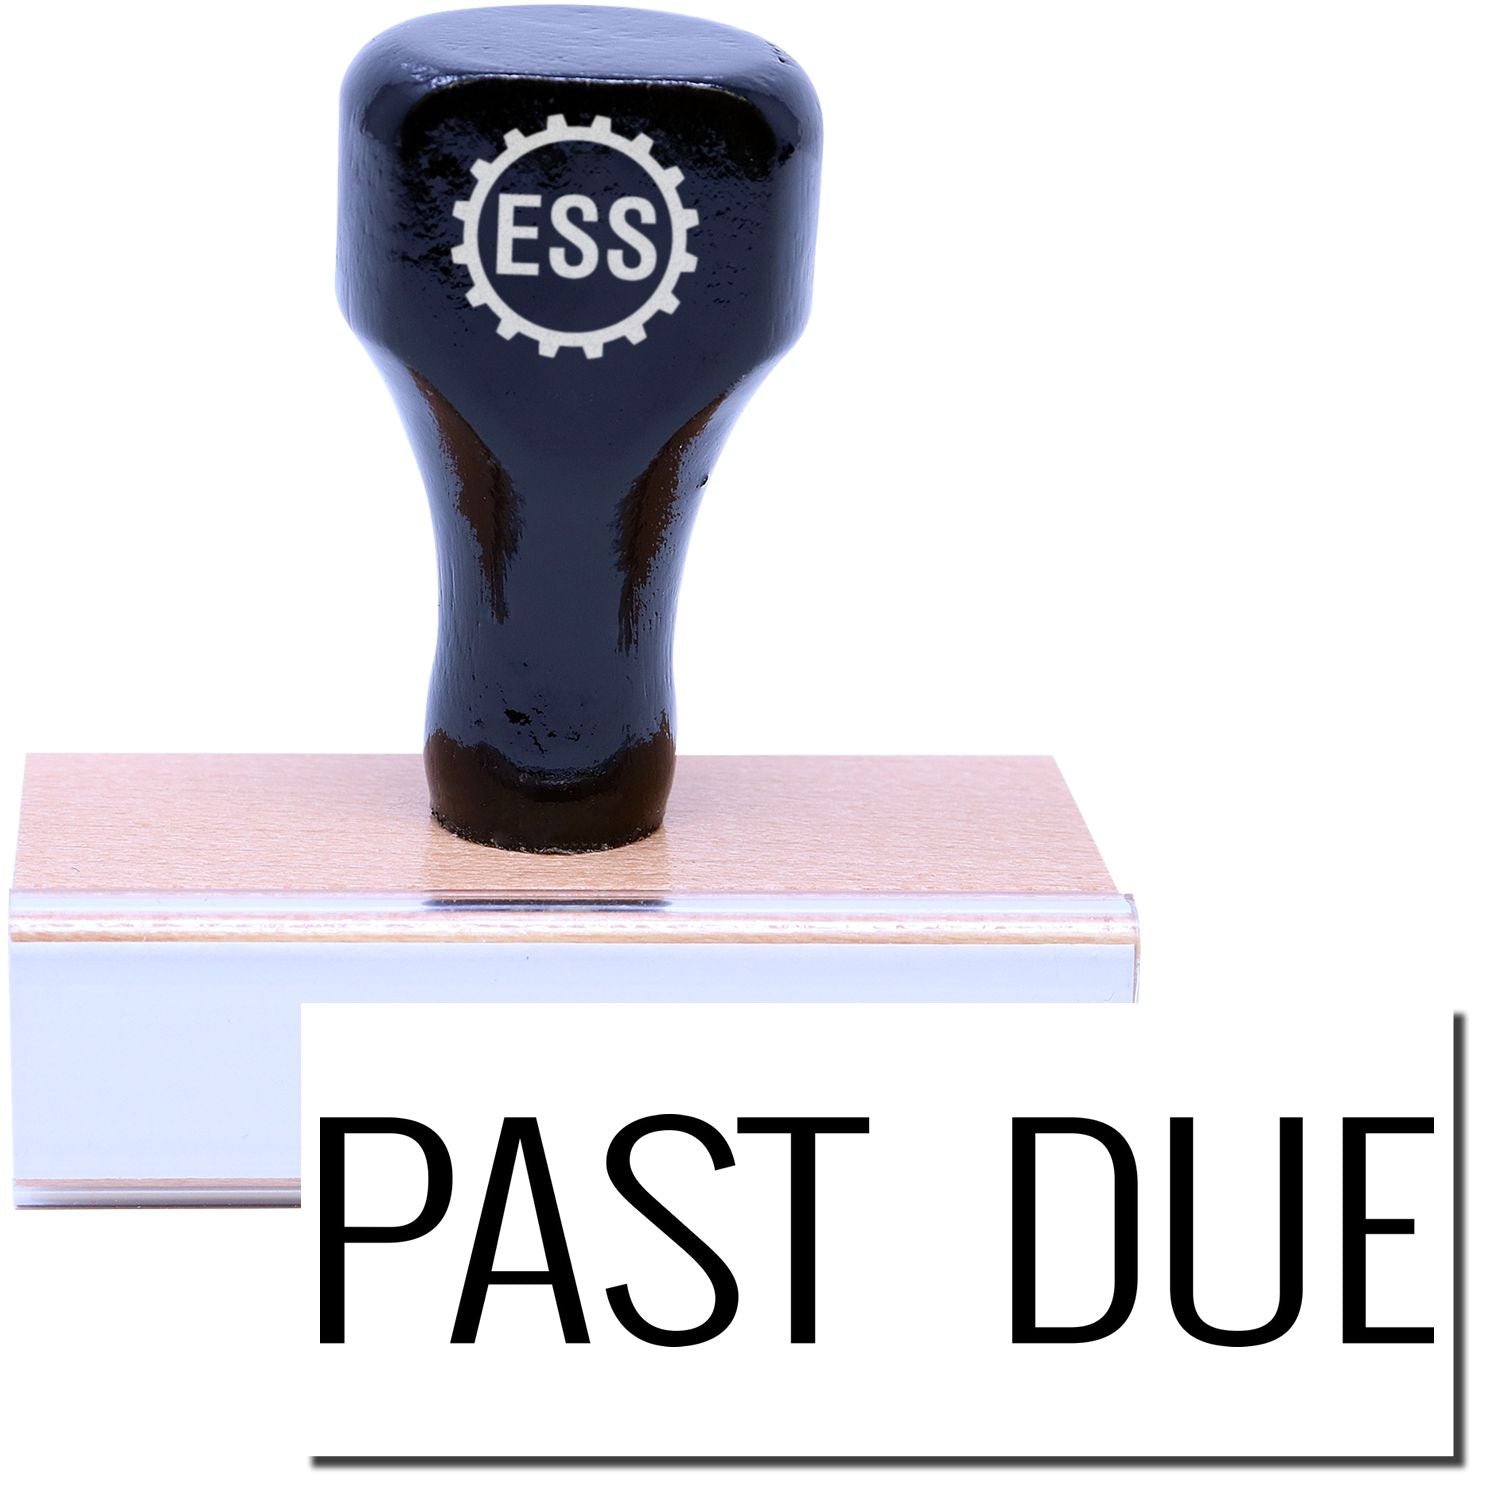 A stock office rubber stamp with a stamped image showing how the text "PAST DUE" in a narrow font is displayed after stamping.